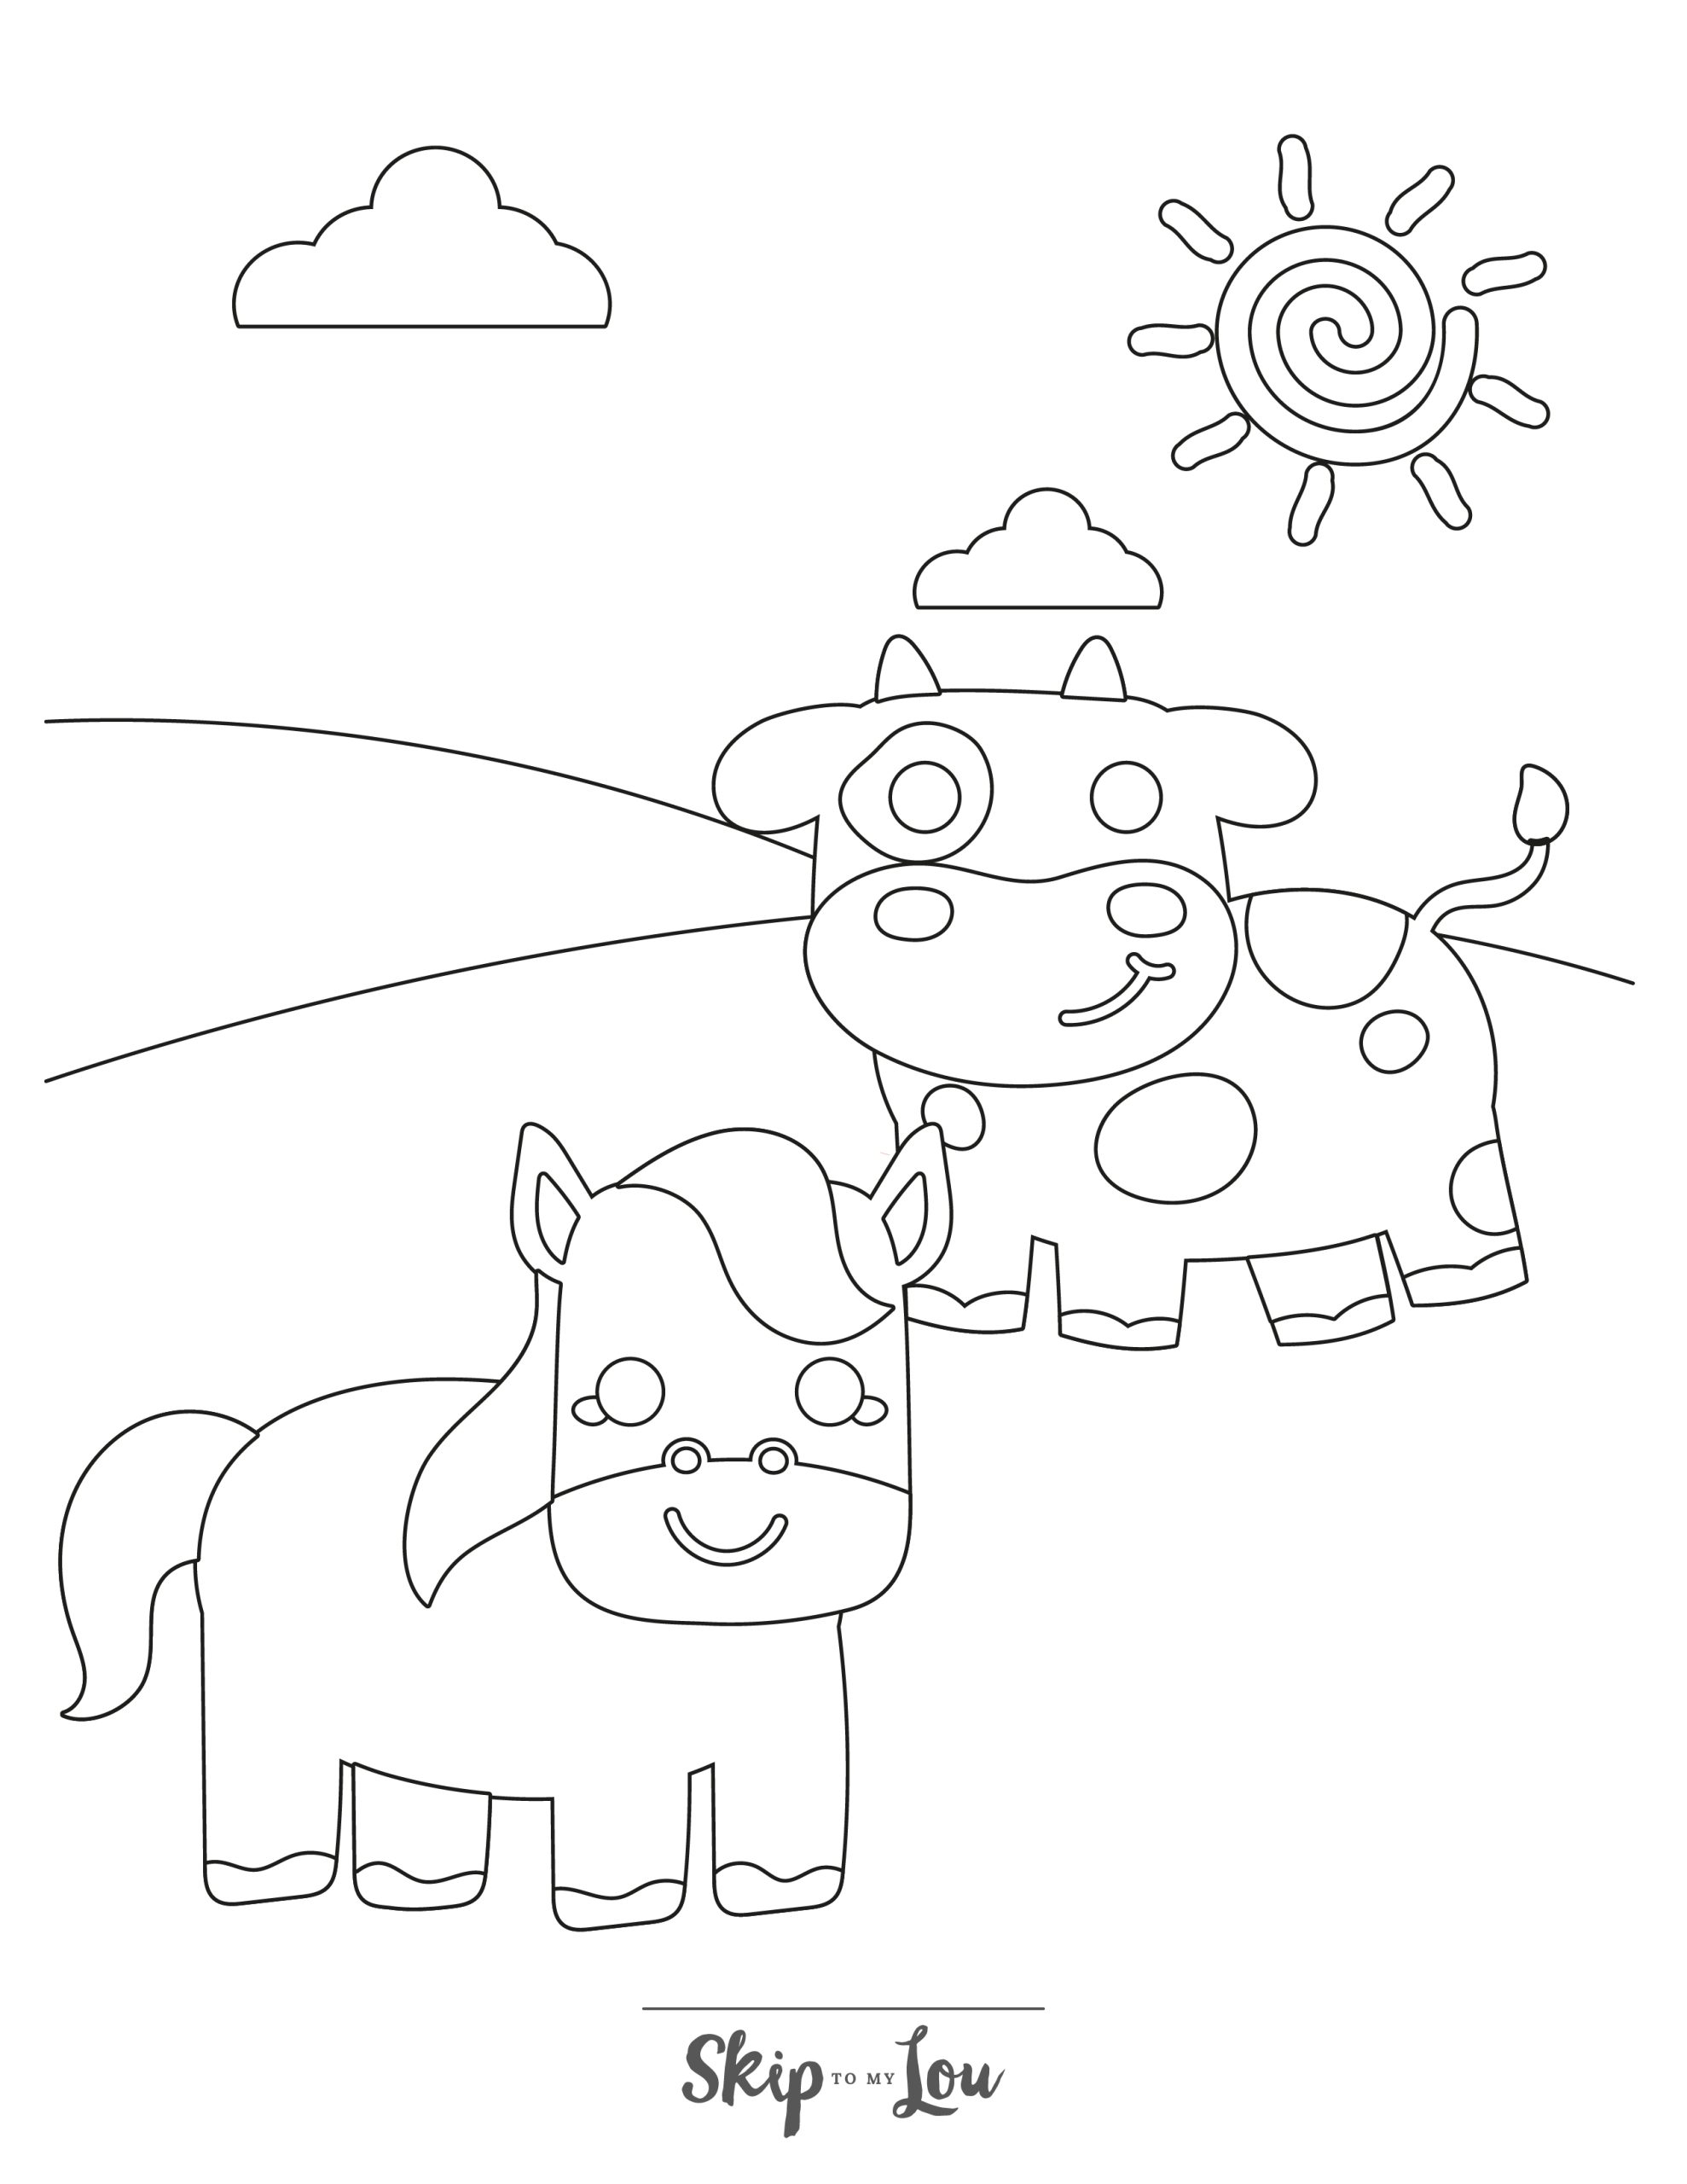 Farm Coloring Page 8 - A line drawing of a small cow and horse on a hill. The sun and clouds can be seen in the background. 